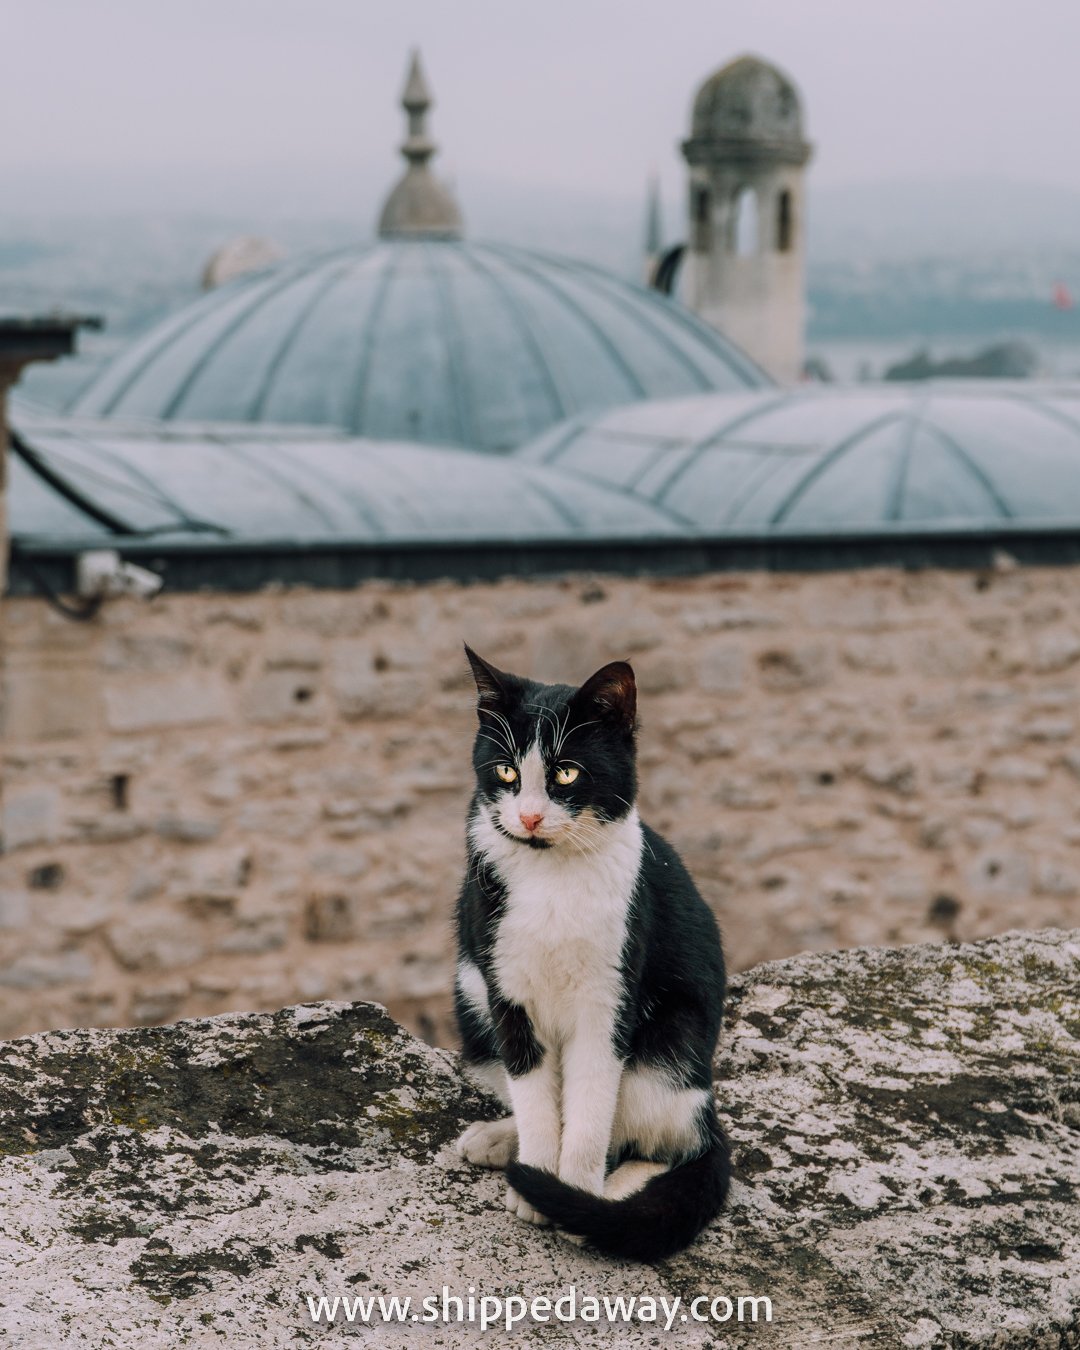 Cat at Suleymaniye Mosque rooftops, Istanbul